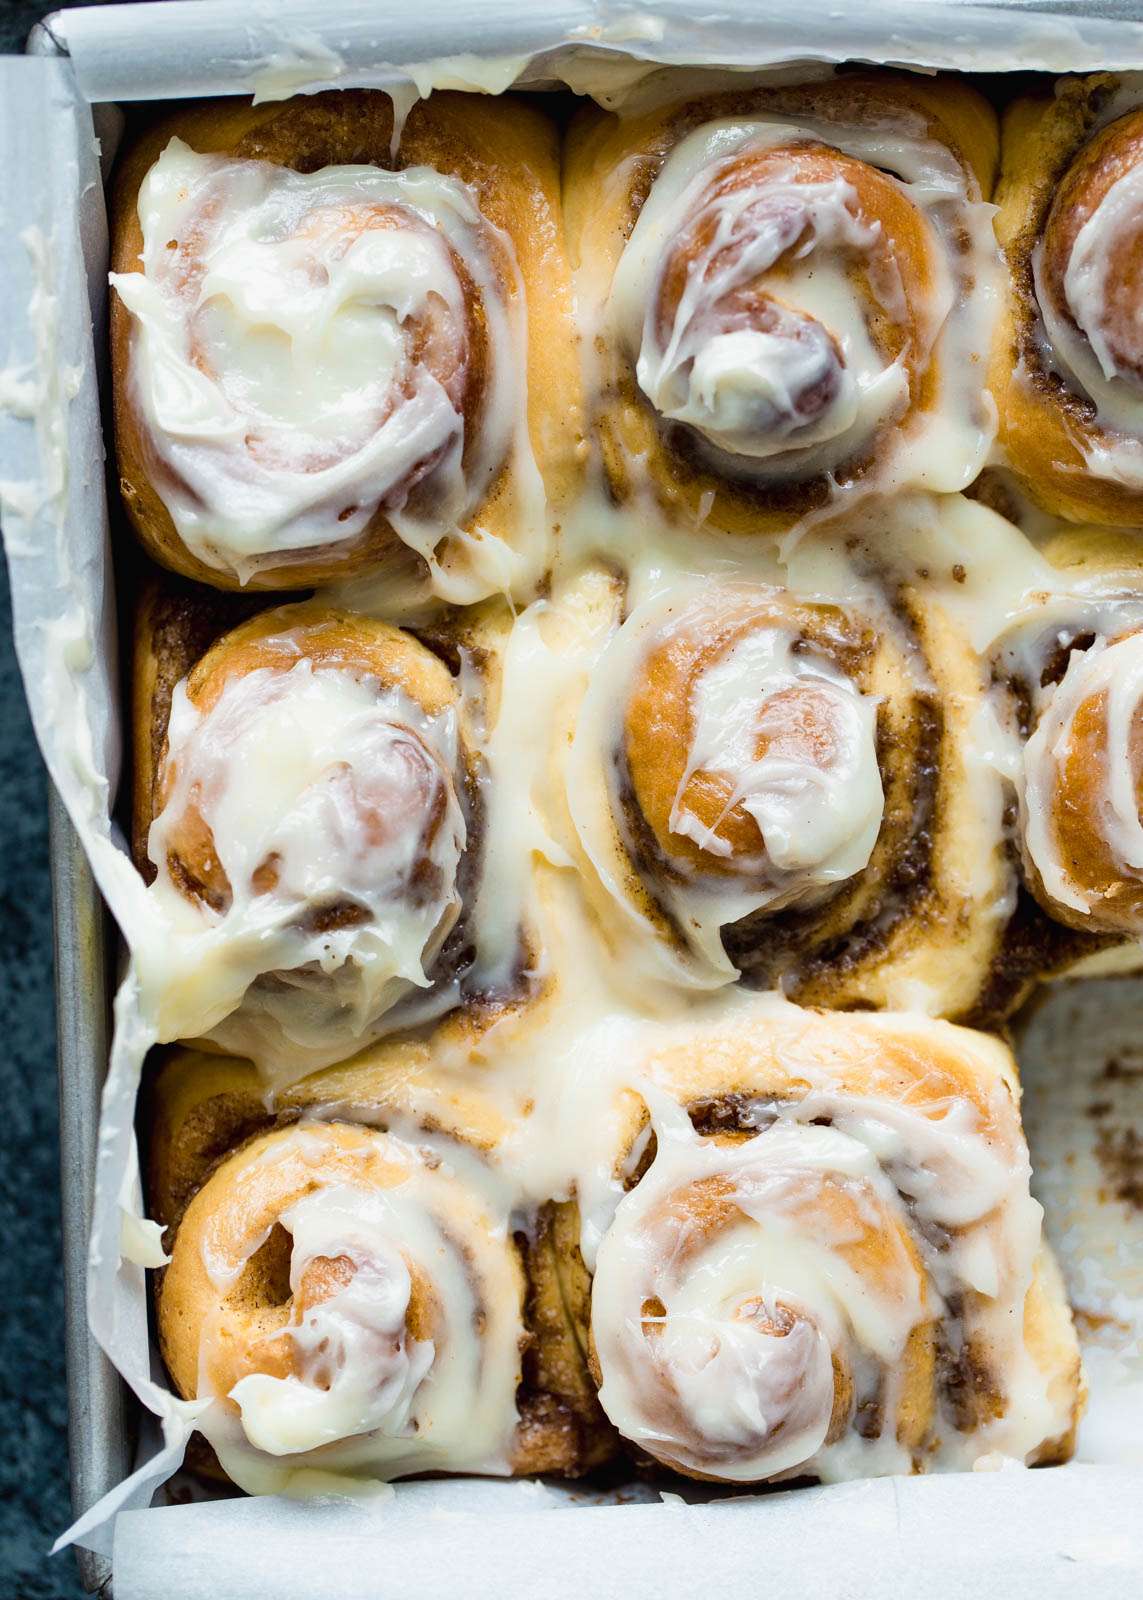 A tray of baked cinnamon rolls covered in a creamy vanilla glaze.